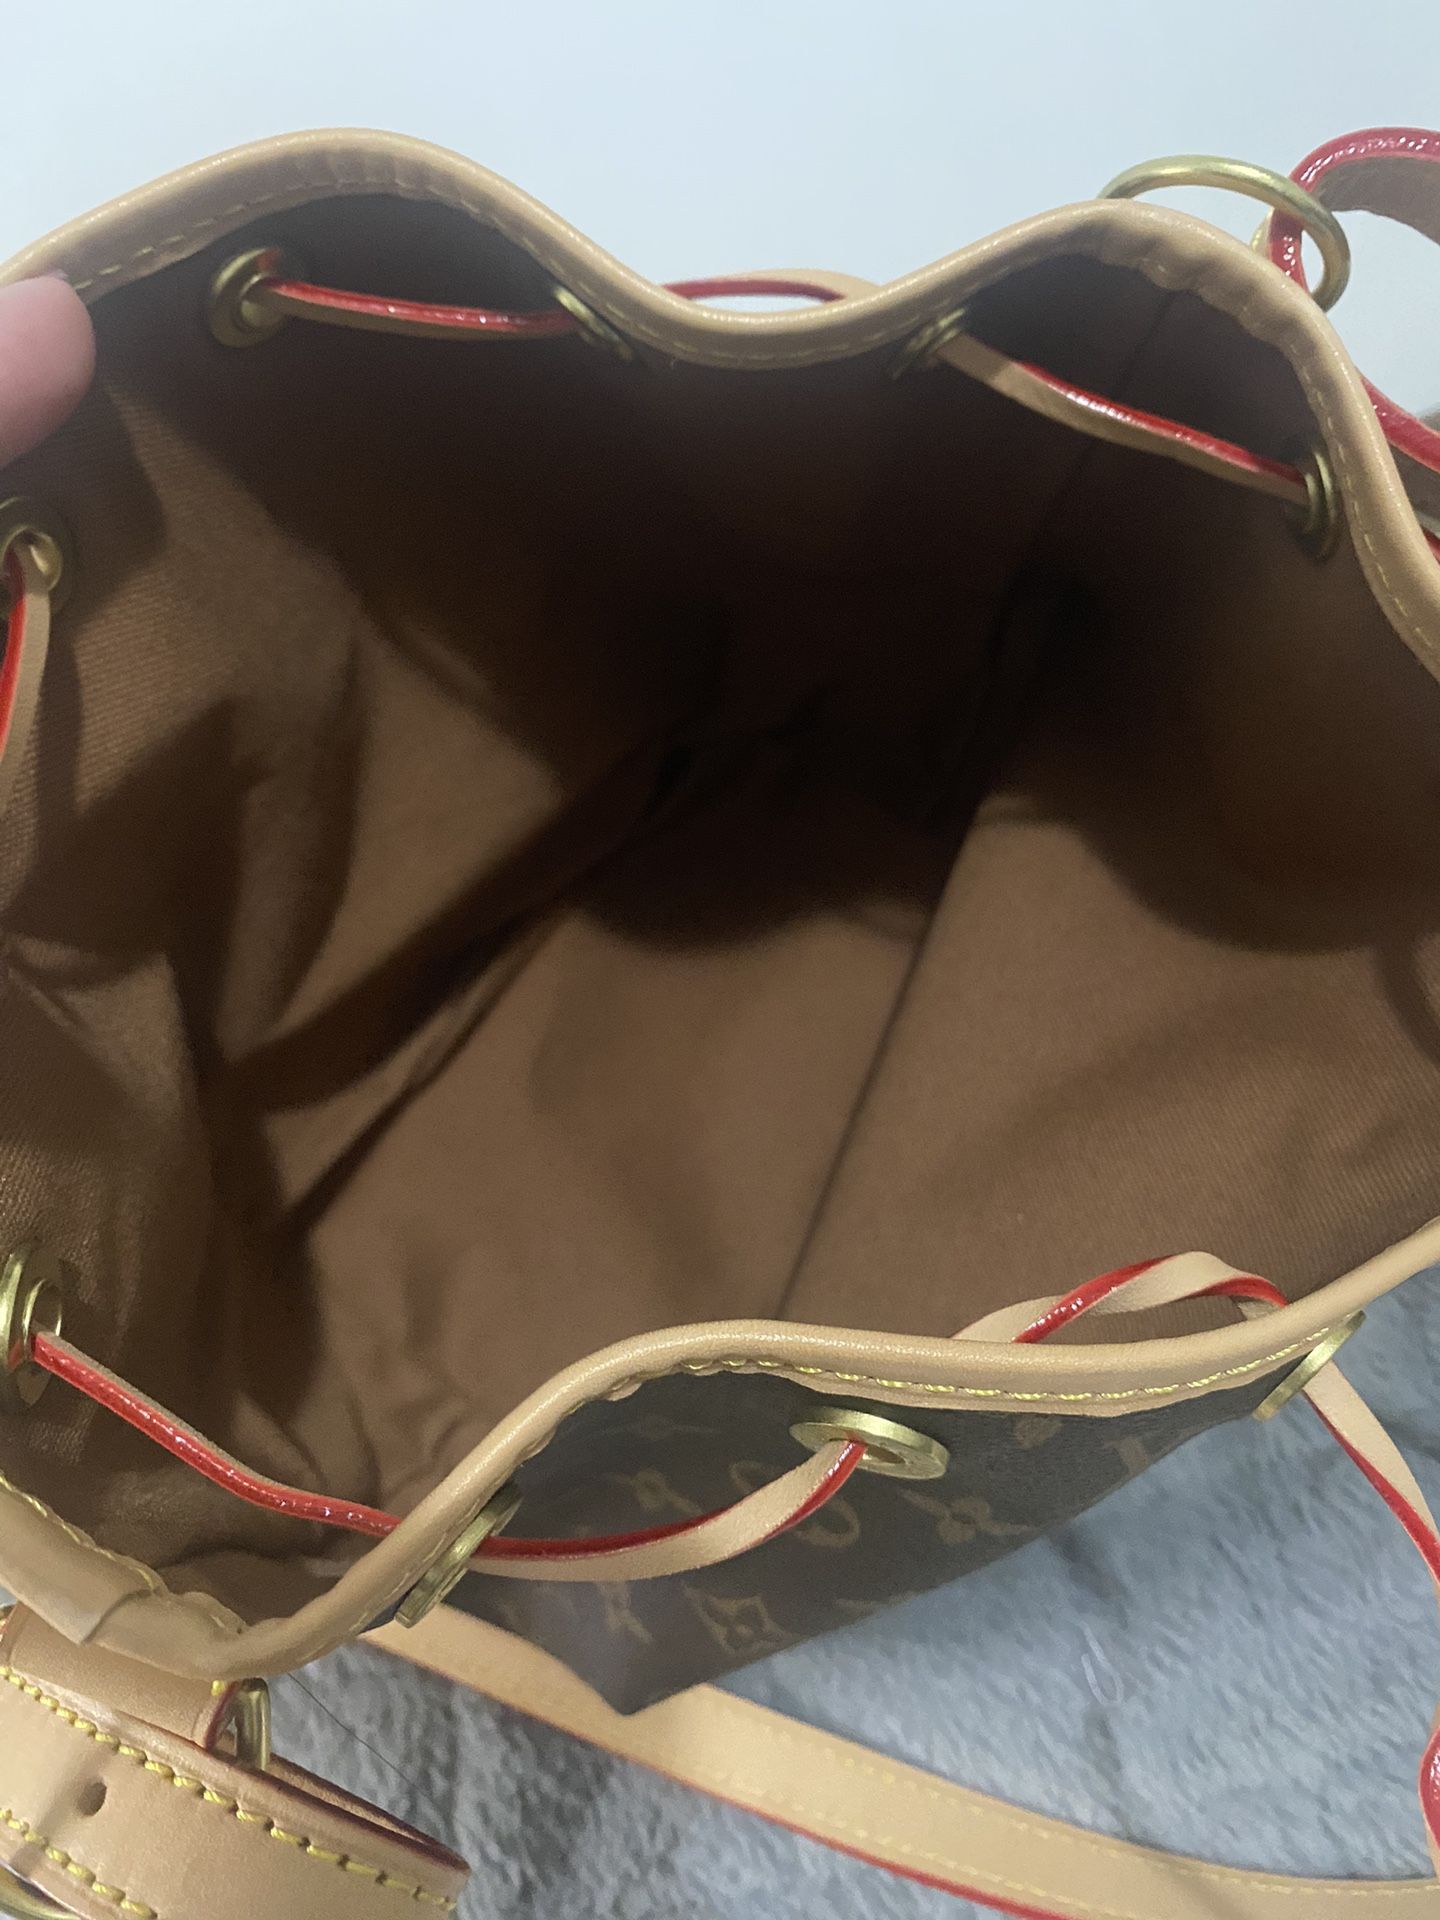 Louis Vuitton Noe bb LV for Sale in Alameda, CA - OfferUp